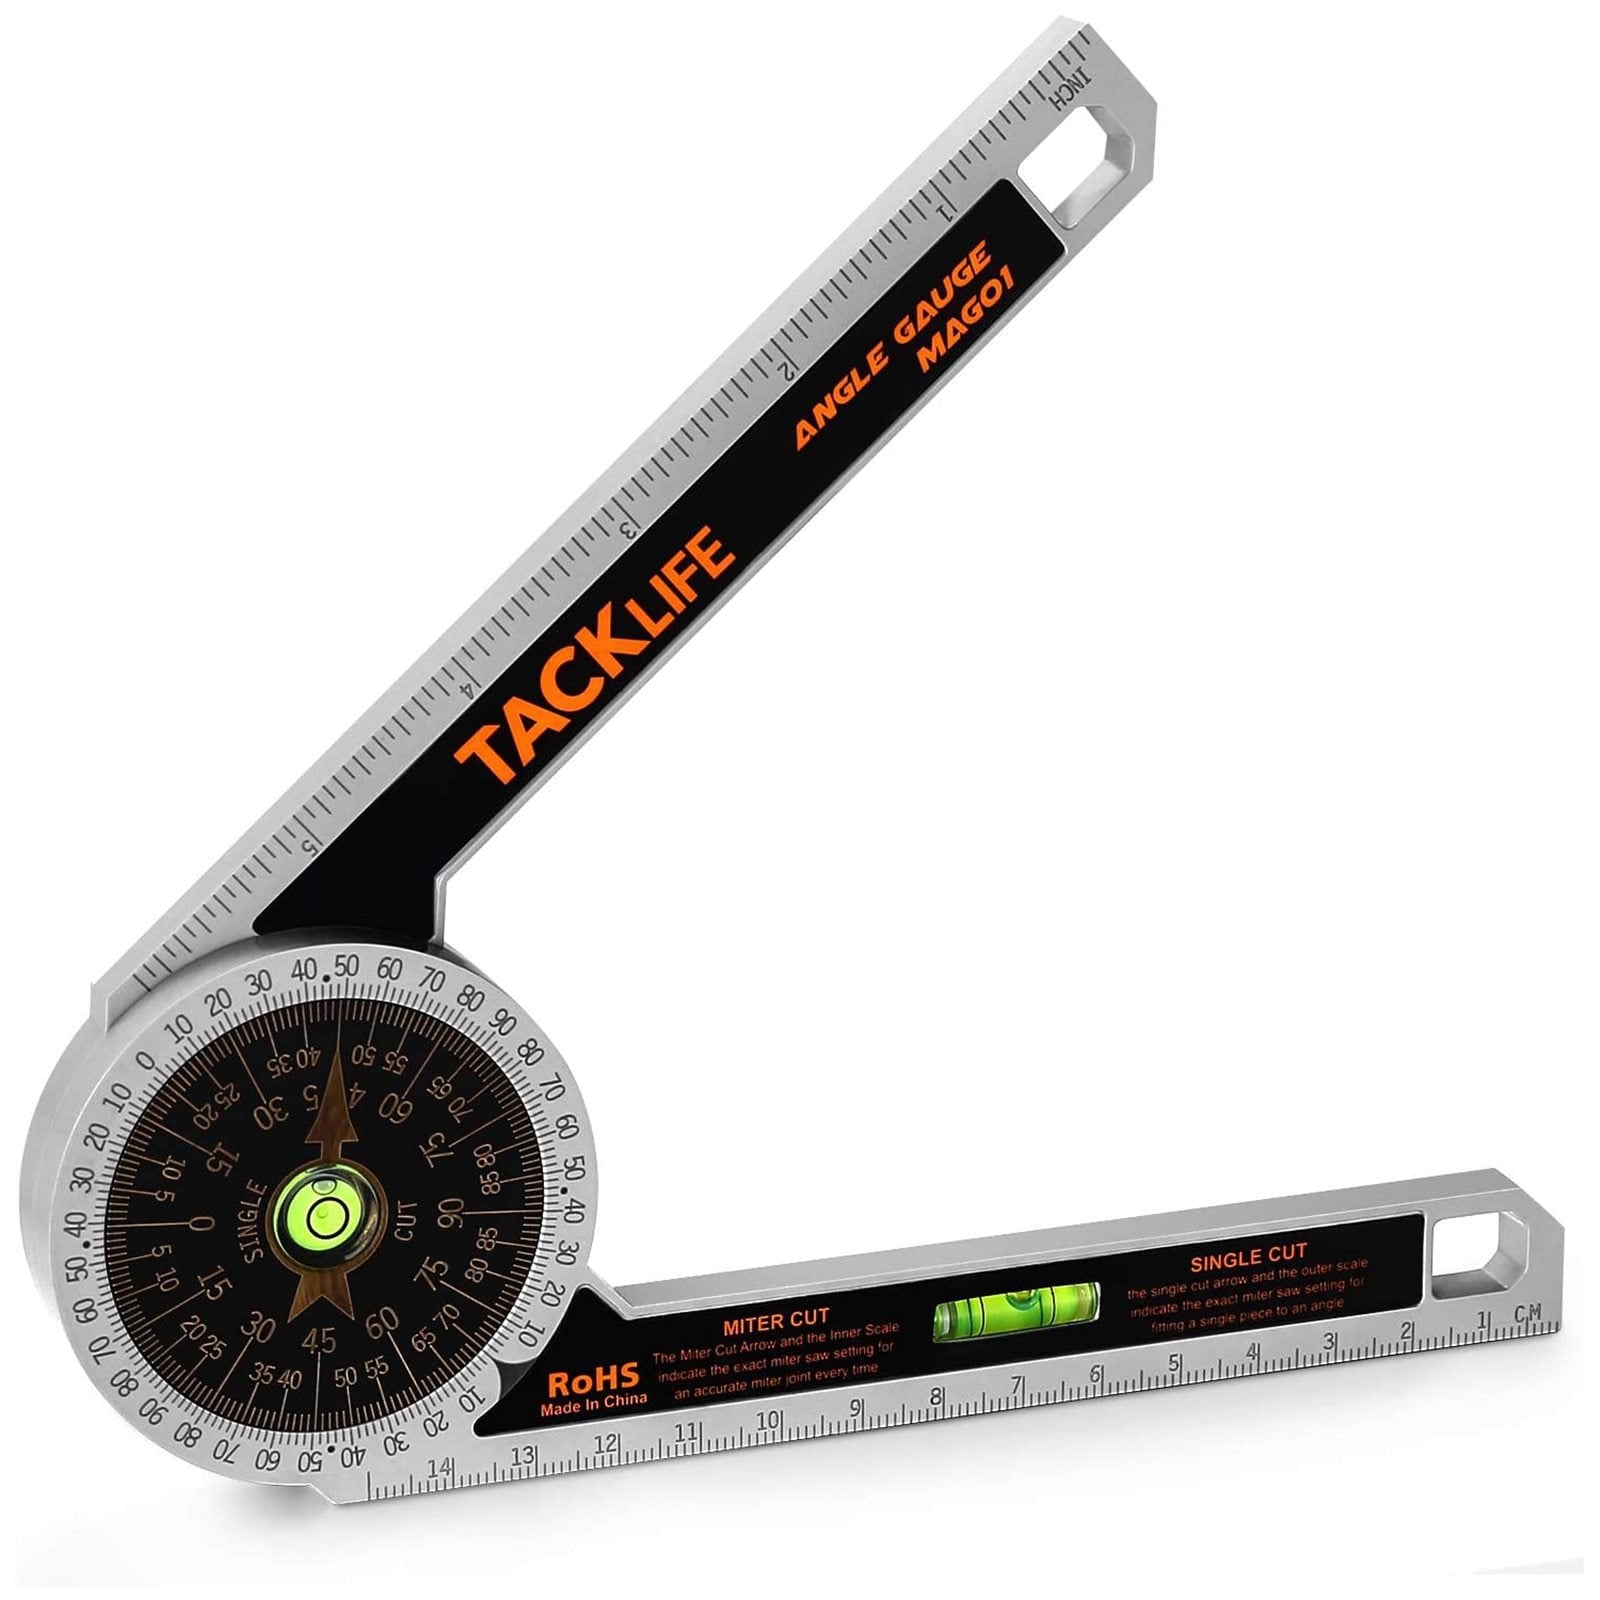 Miter Saw Protractor Angle Gauge, Angle Finder